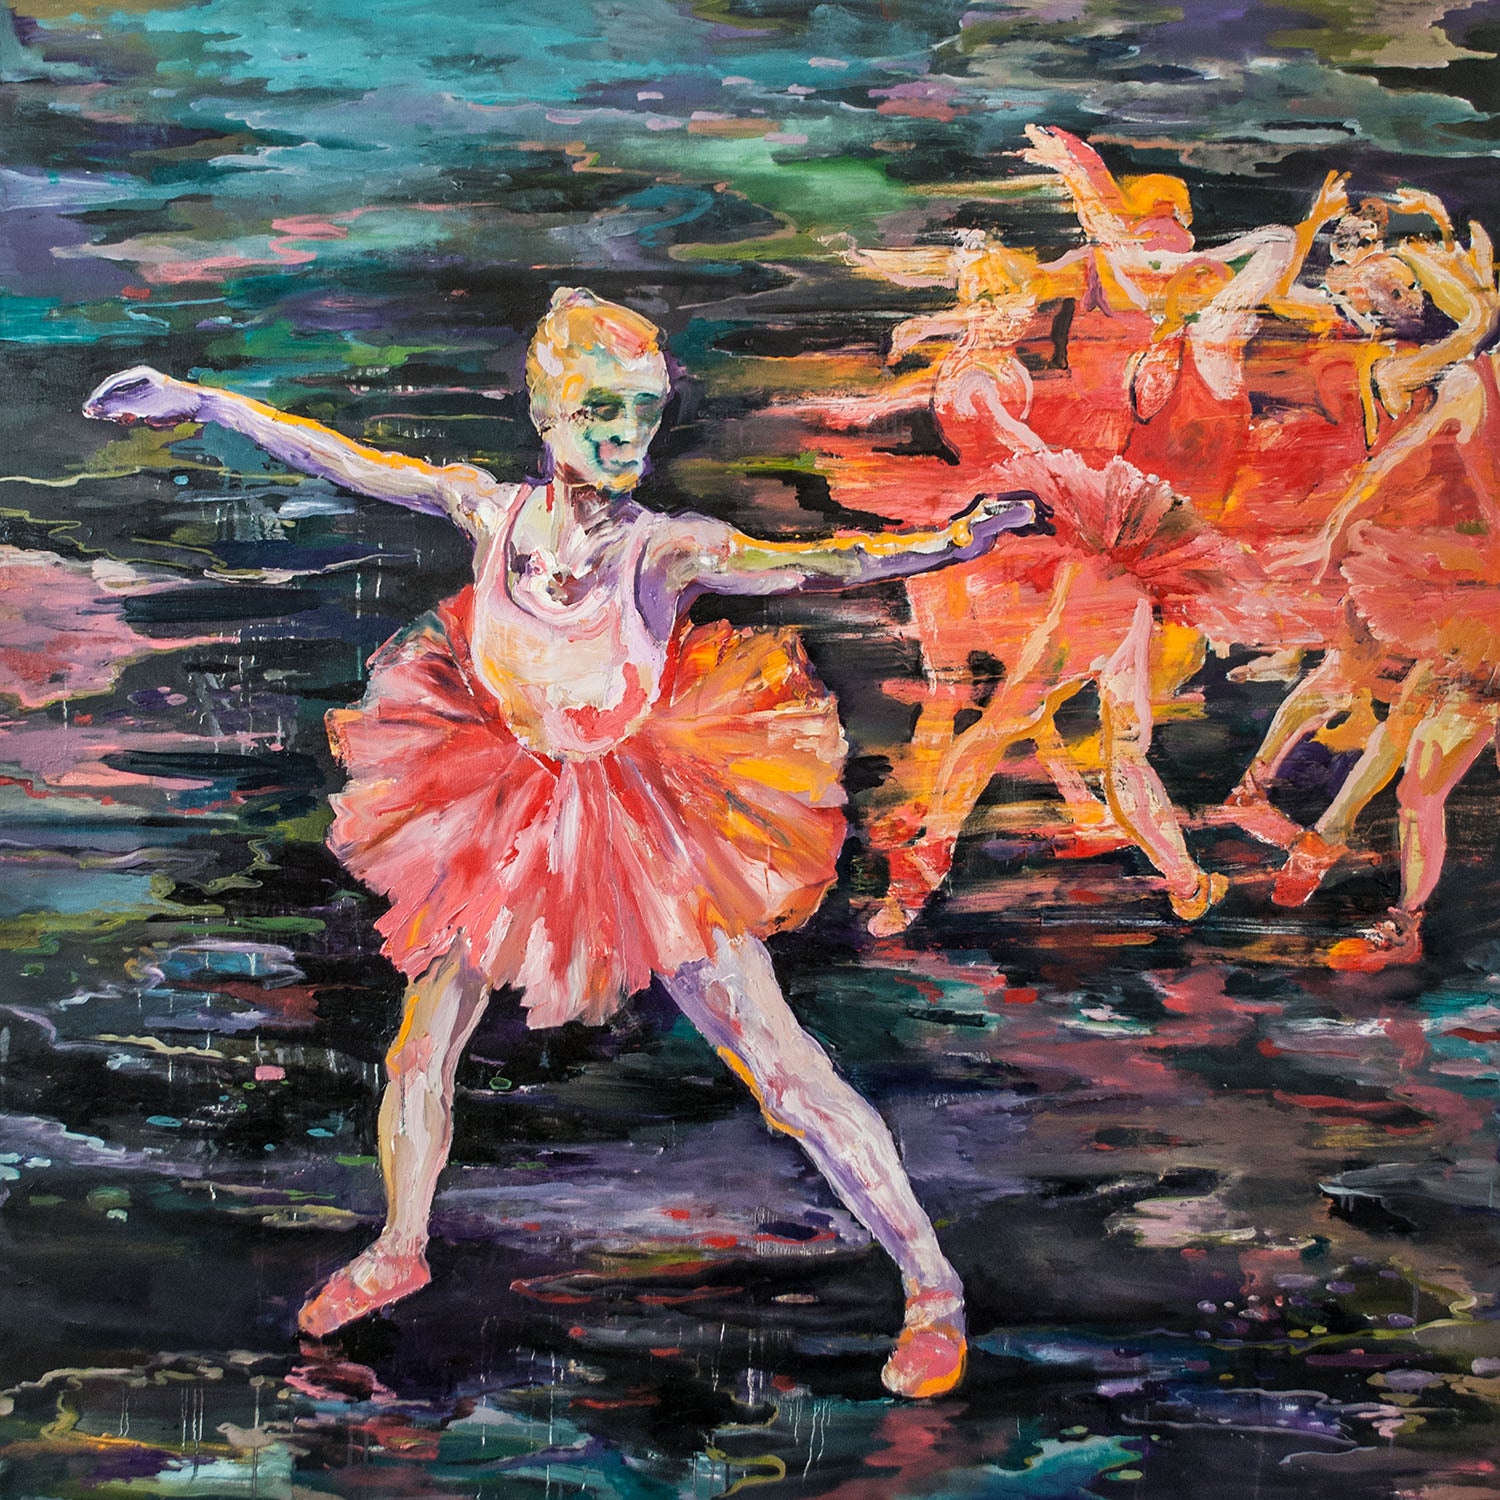 Dancers of Love, 150x150cm, oil on canvas, 2021 by Dominic Virtosu